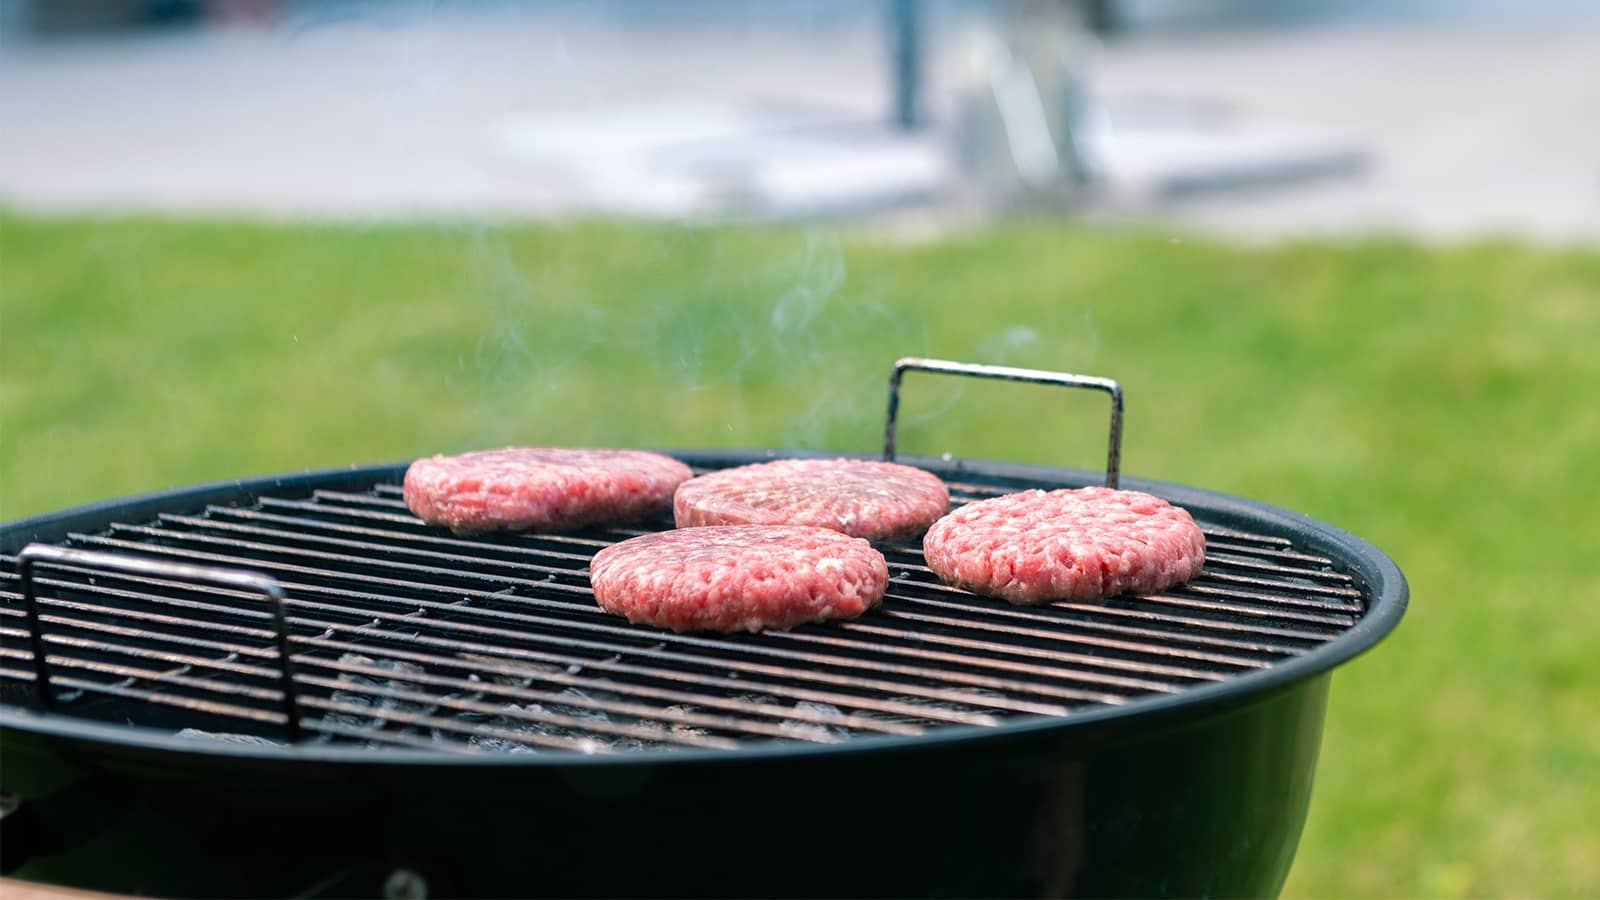 burgers being cooked on a grill